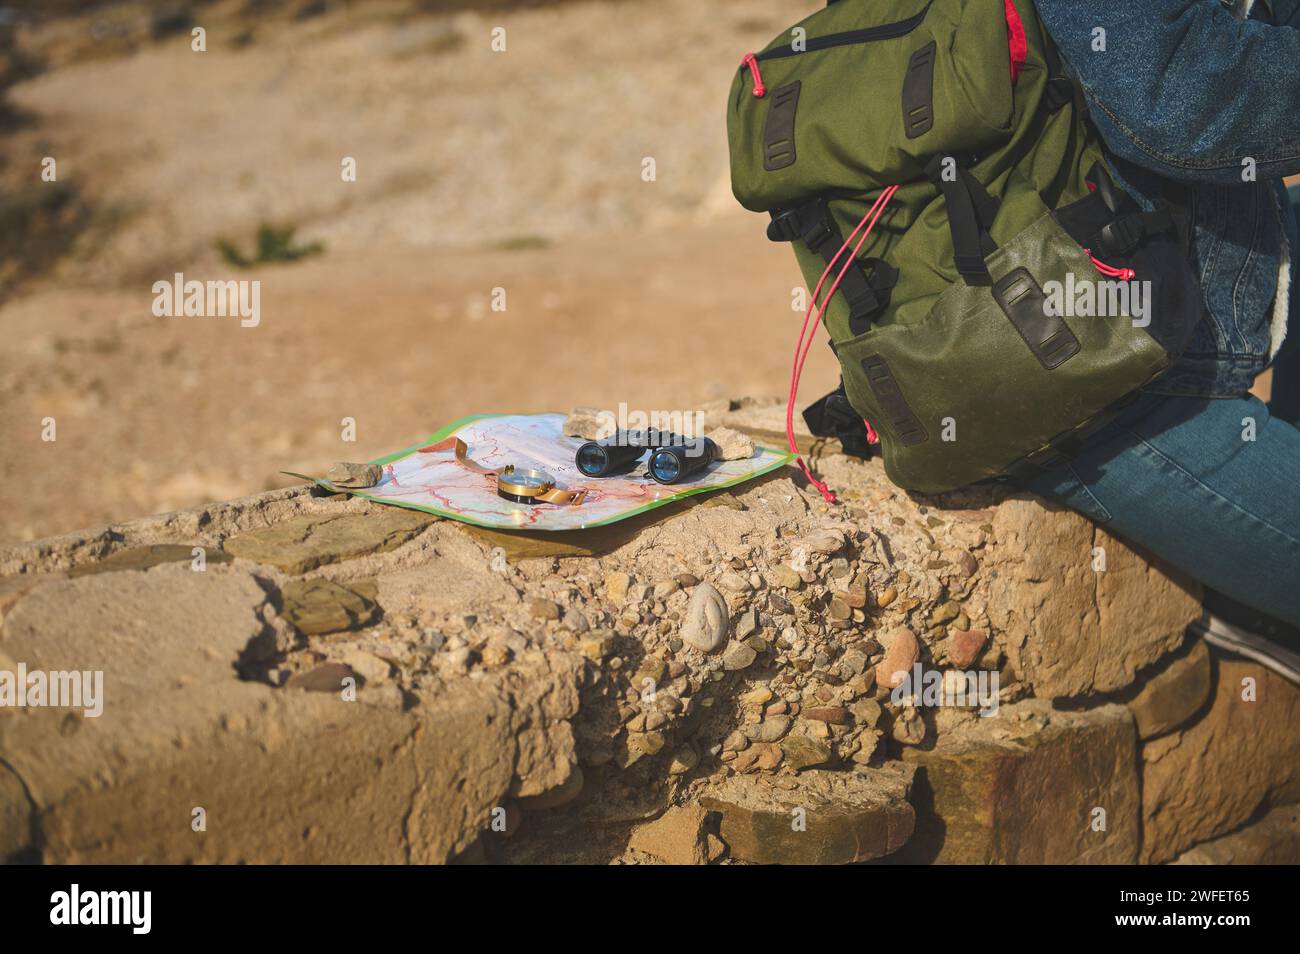 Tourism concept. Close-up binoculars, compass on a map near a backpack of a male tourist sitting on the cliff, enjoying his hiking on the adventure tr Stock Photo